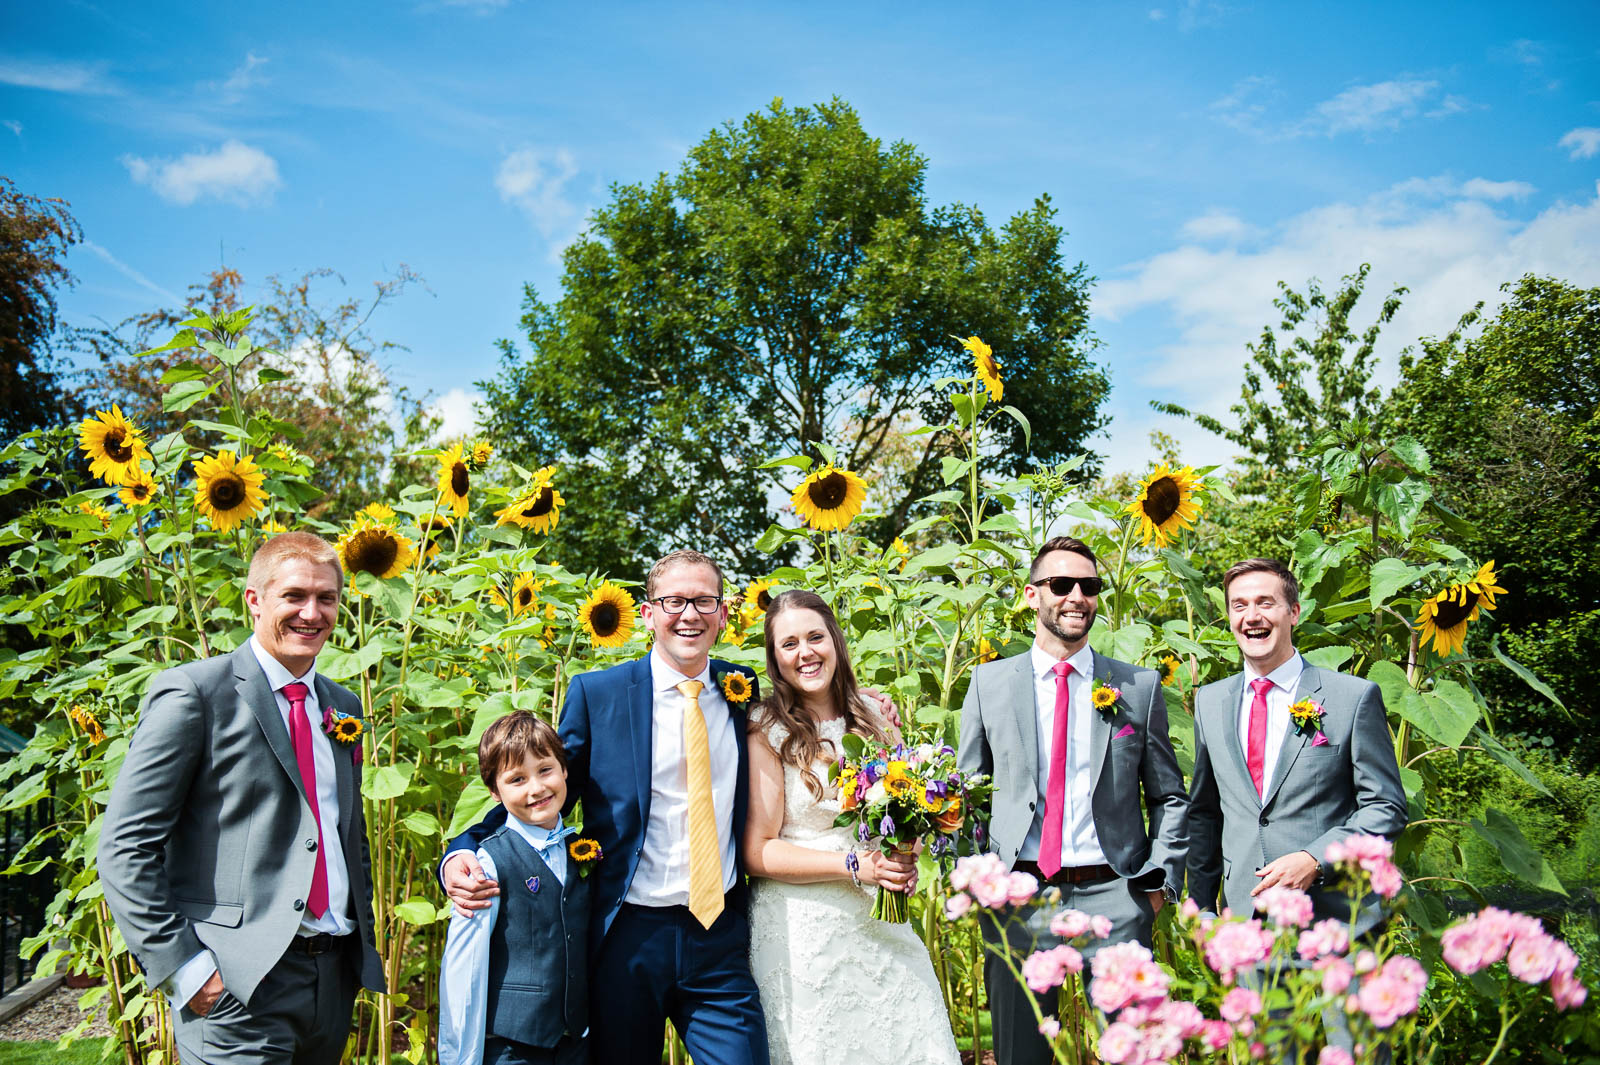 Bridal party having a group shot with sunflowers behind them.